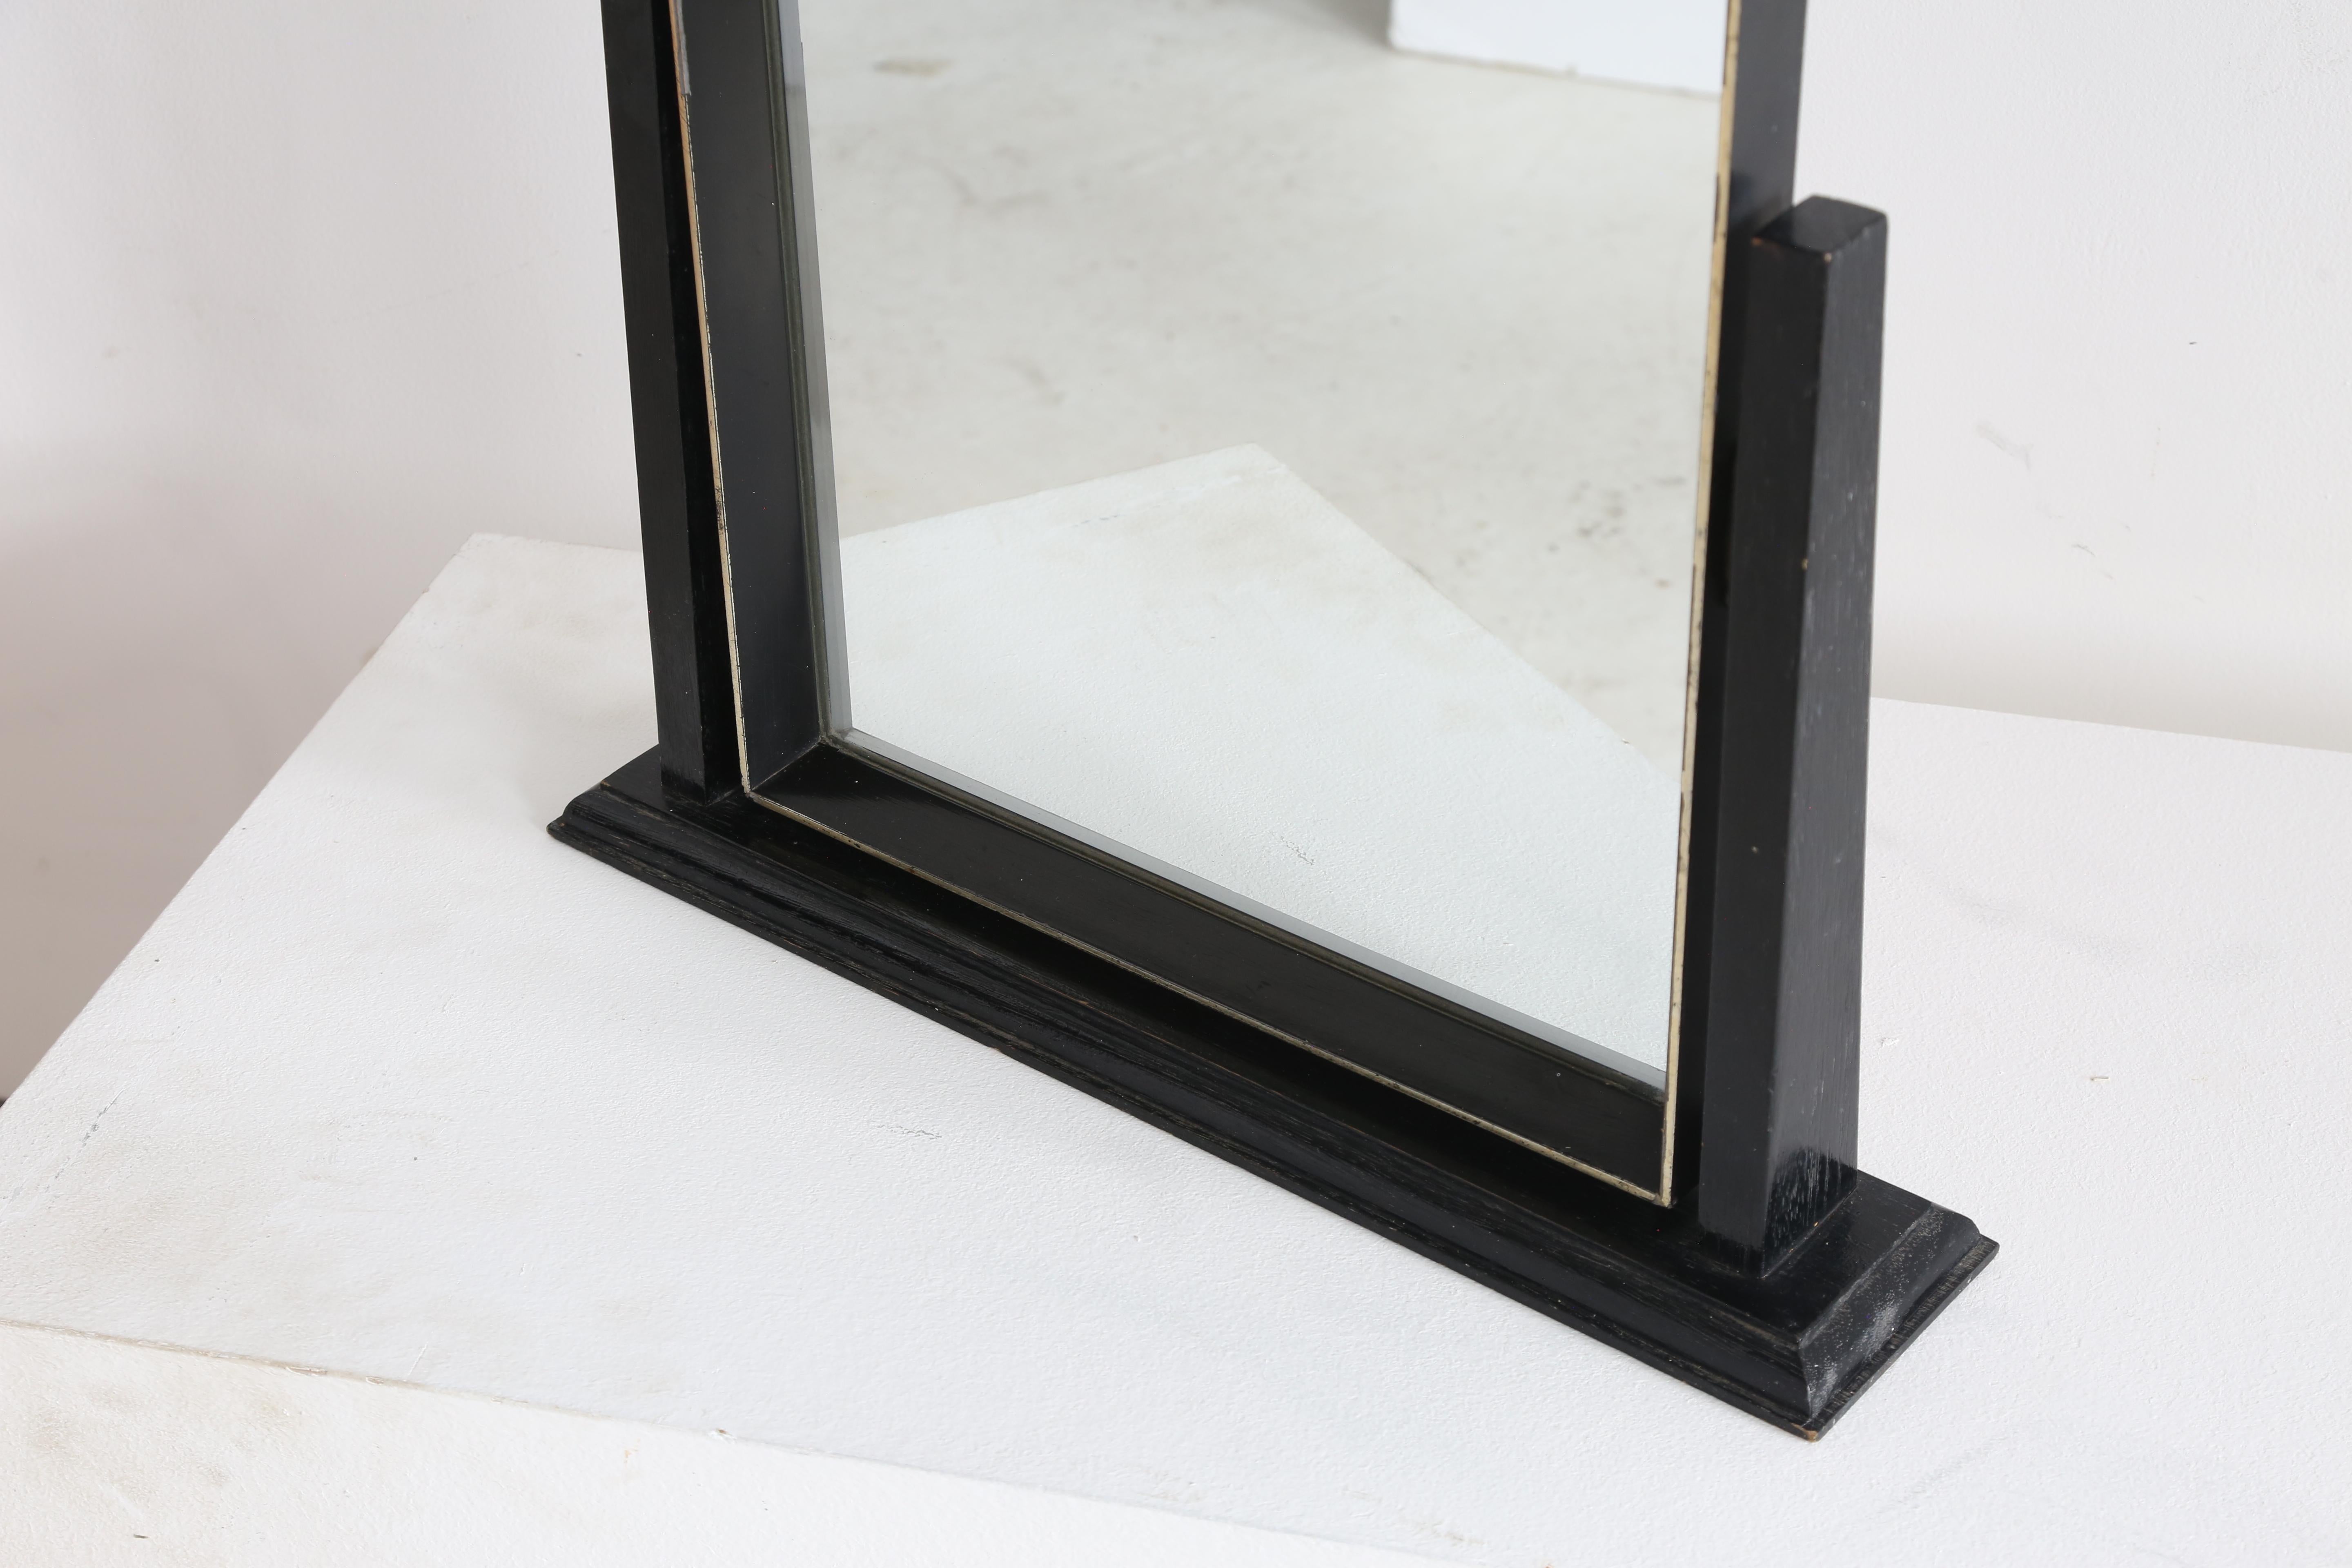 Super smart table top adjustable mirror.

Cerused oak and silver edge gilt frame.

British made by Rowley Gallery during 1950s.

Some small loses to the silver gilt, see close up.

H 43 cm x W 45 cm x D 10cm